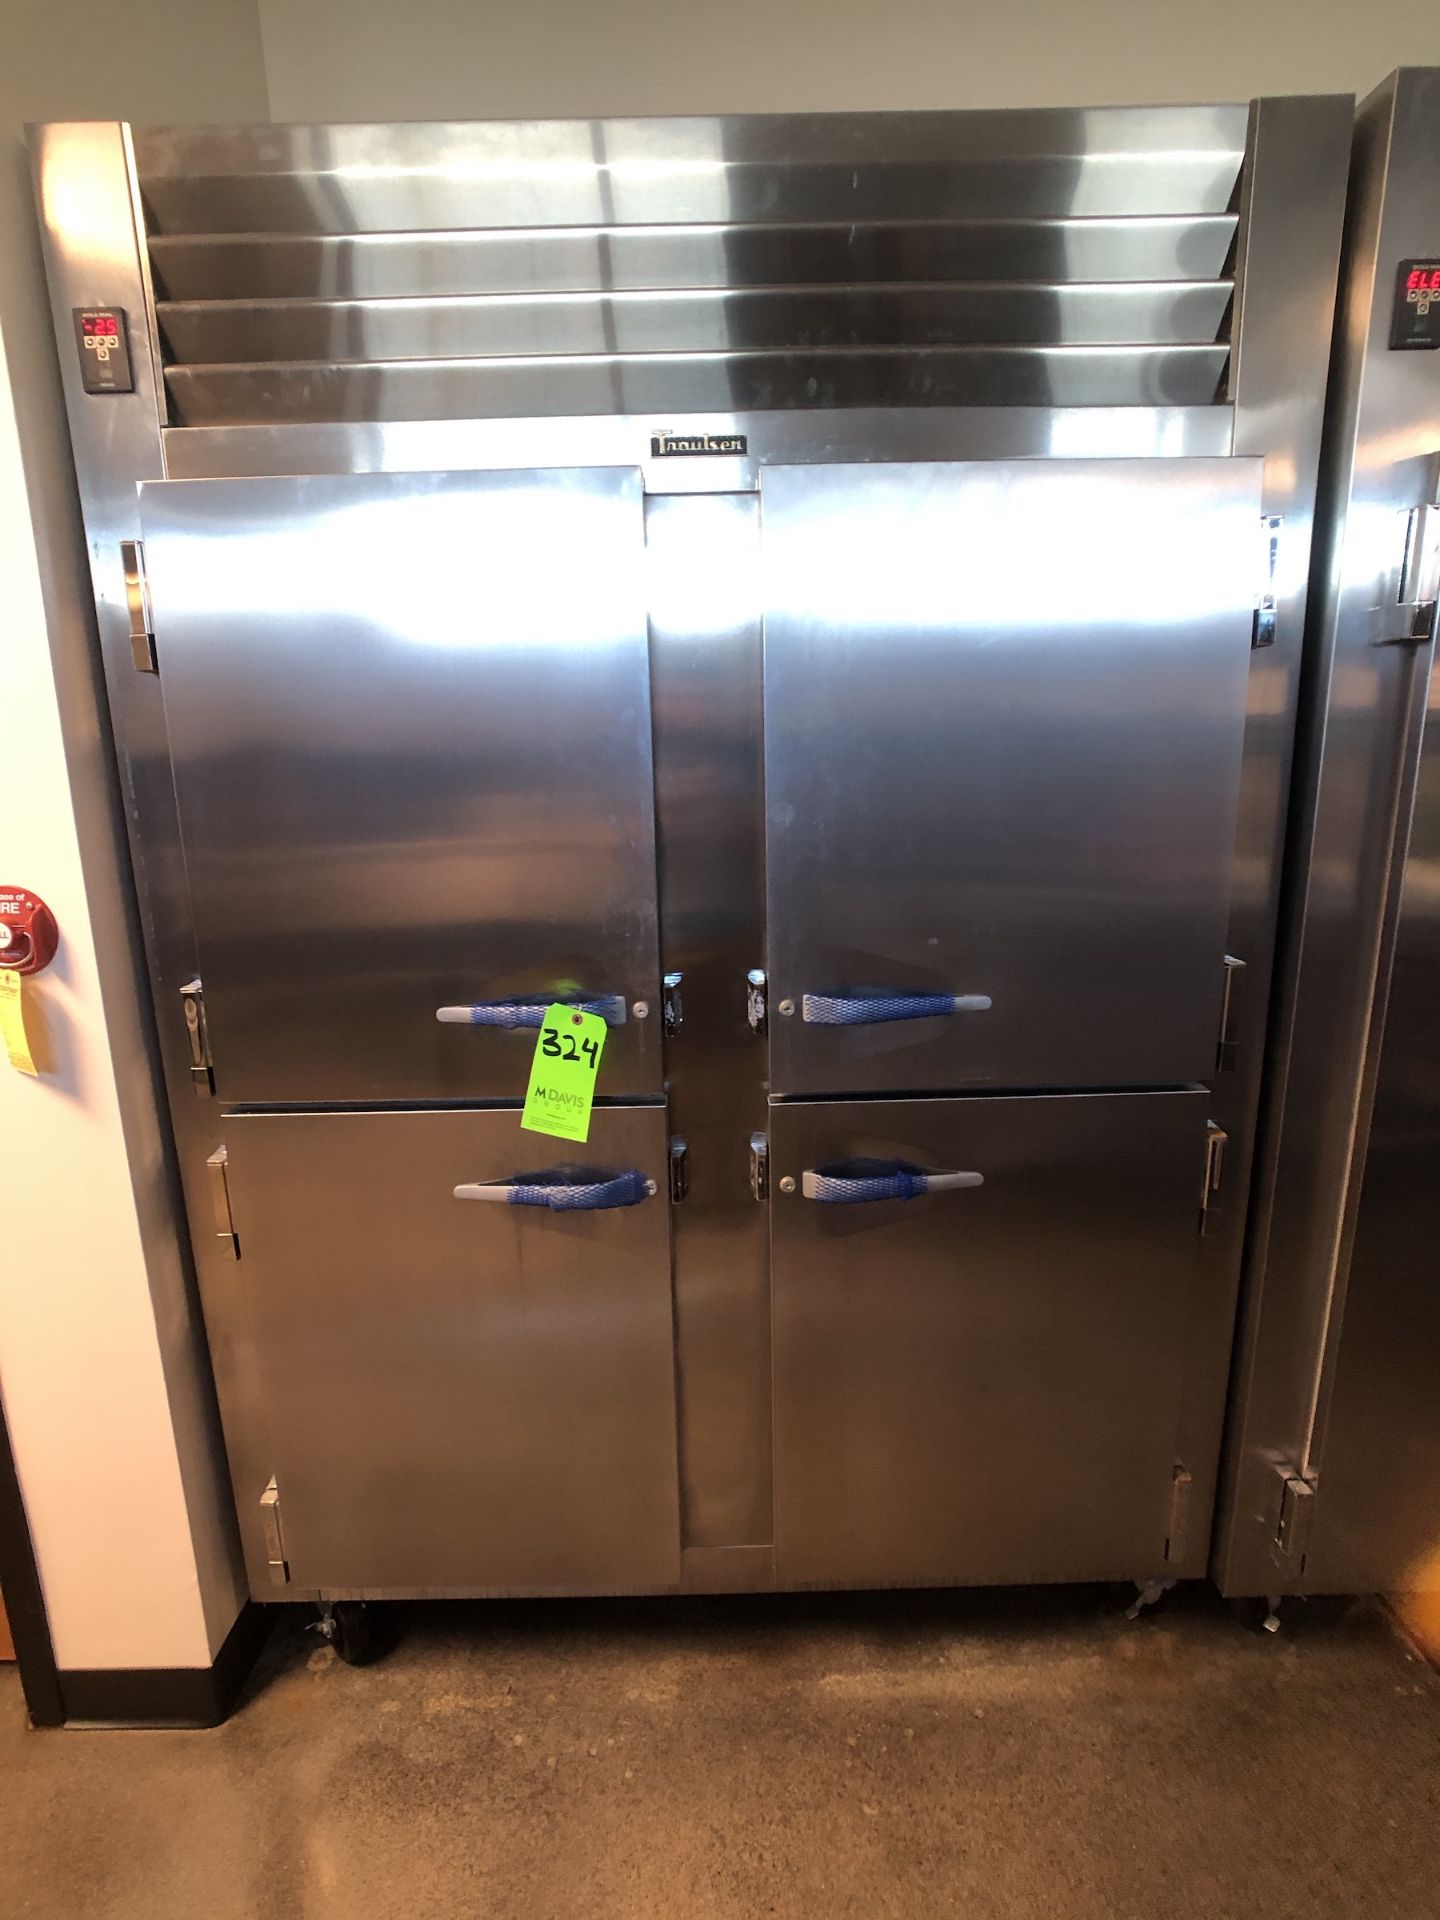 2016 TRAULSEN 4-COMPARTMENT S/S FREEZER, MODEL RLT232WUT-HHS, S/N T49848E16 (BUILT IN MARCH 2016)